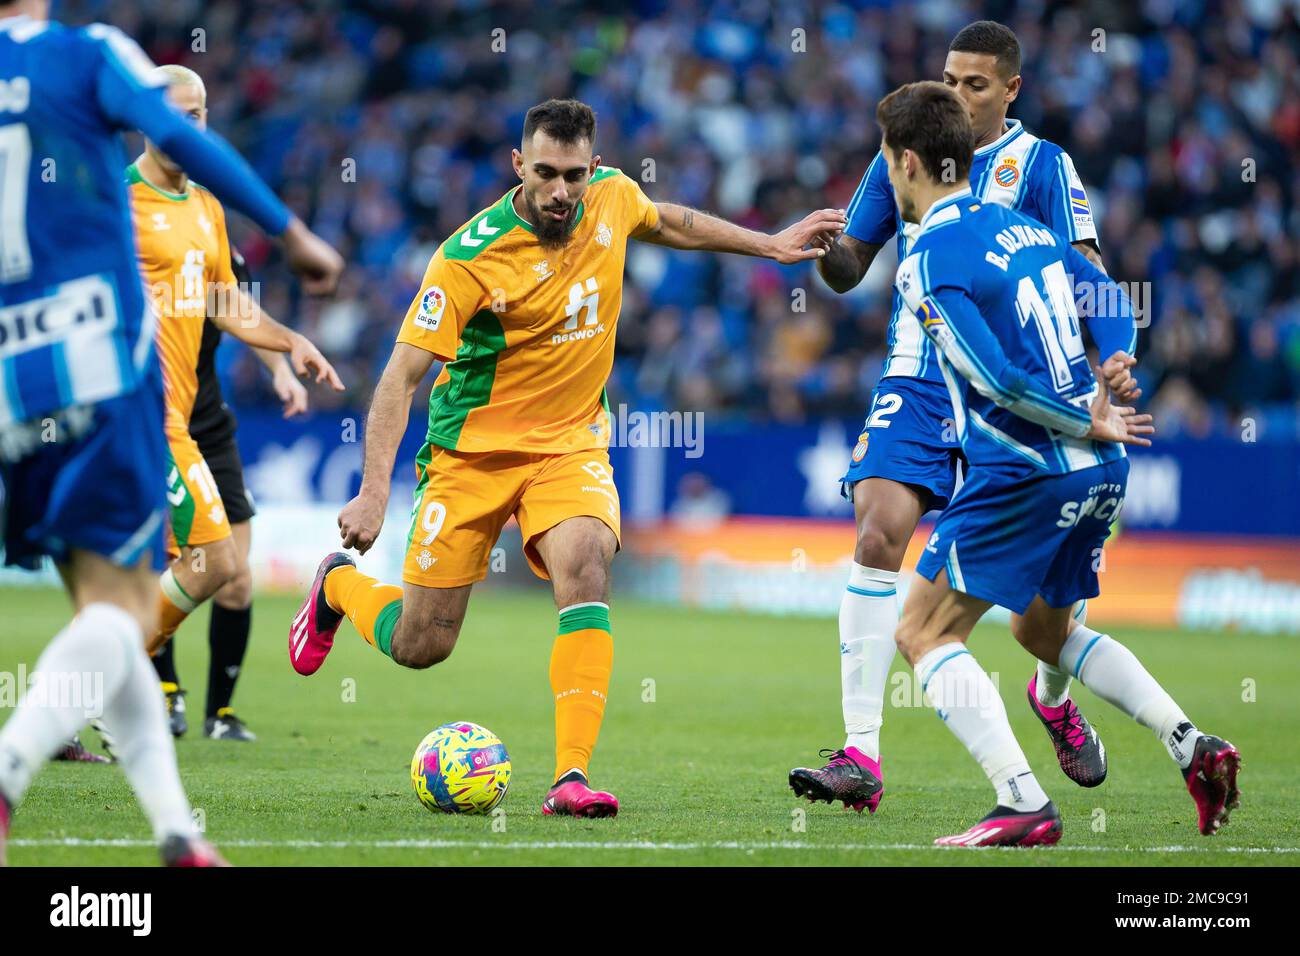 Borja Iglesias of Real Betis during the Liga match between RCD Espanyol and Real Betis at RCDE Stadium in Cornella, Spain. Stock Photo